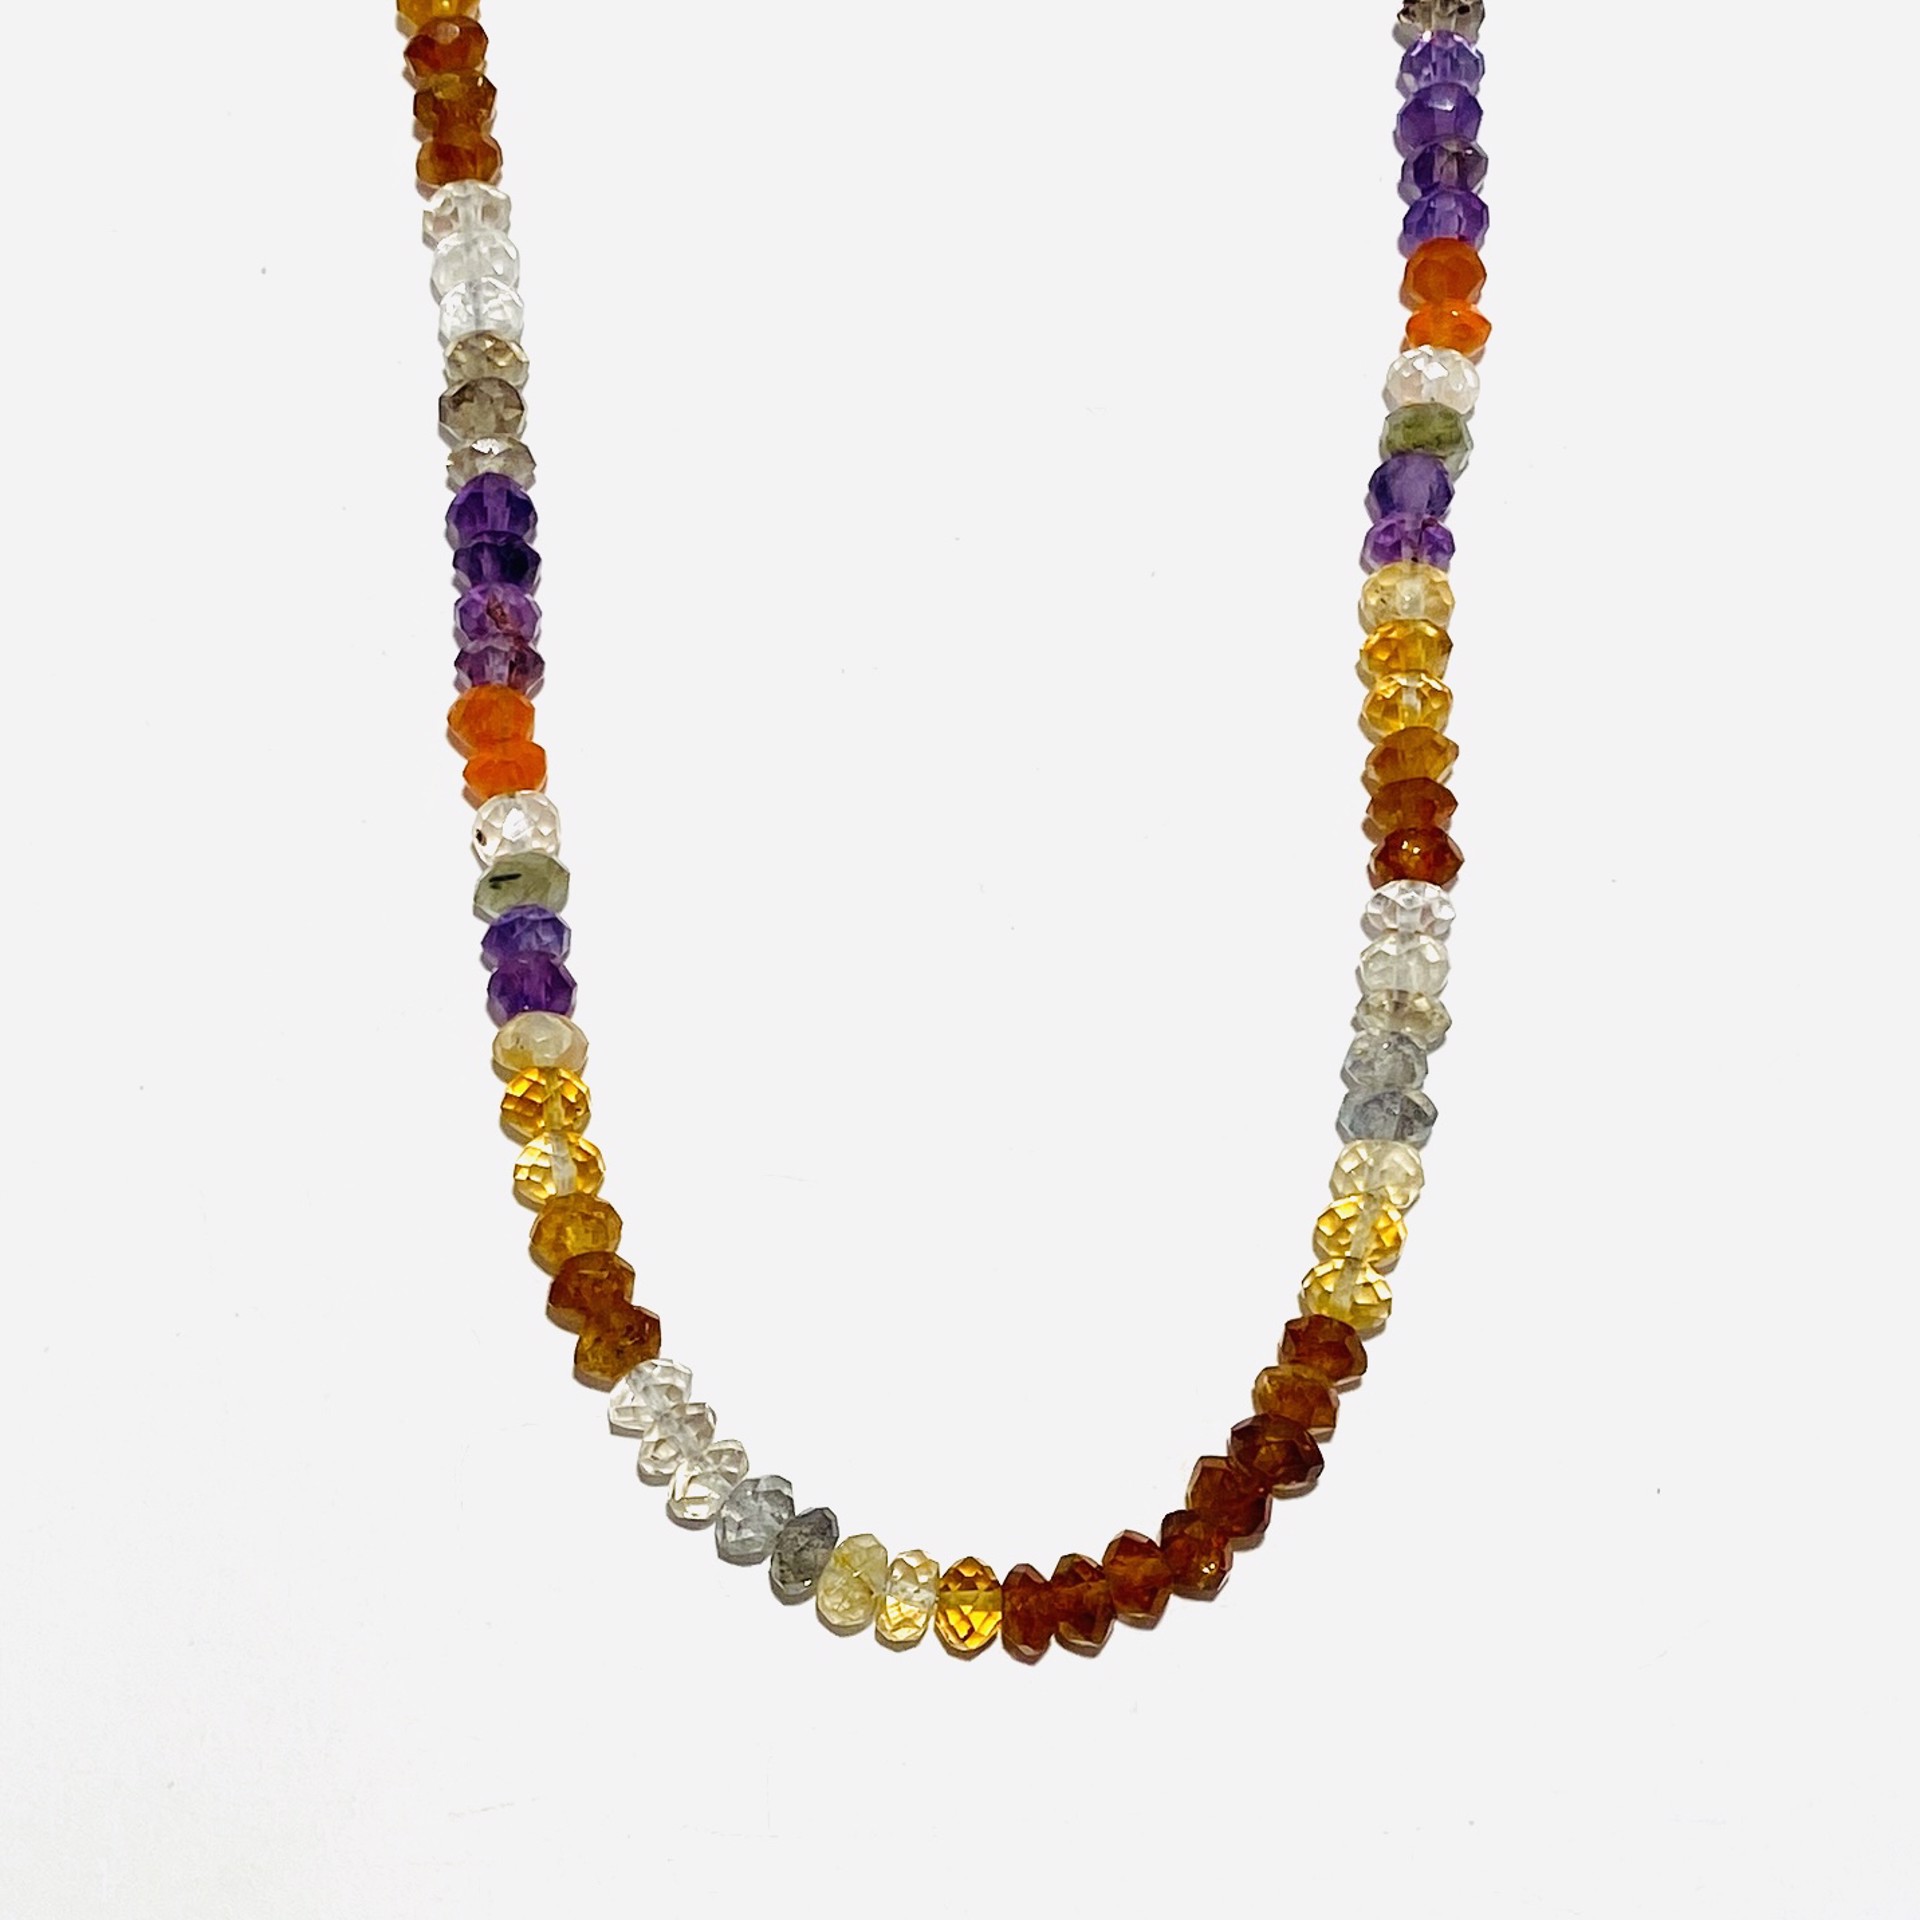 Faceted Mixed Gemstone Strand Necklace NT23-55 by Nance Trueworthy